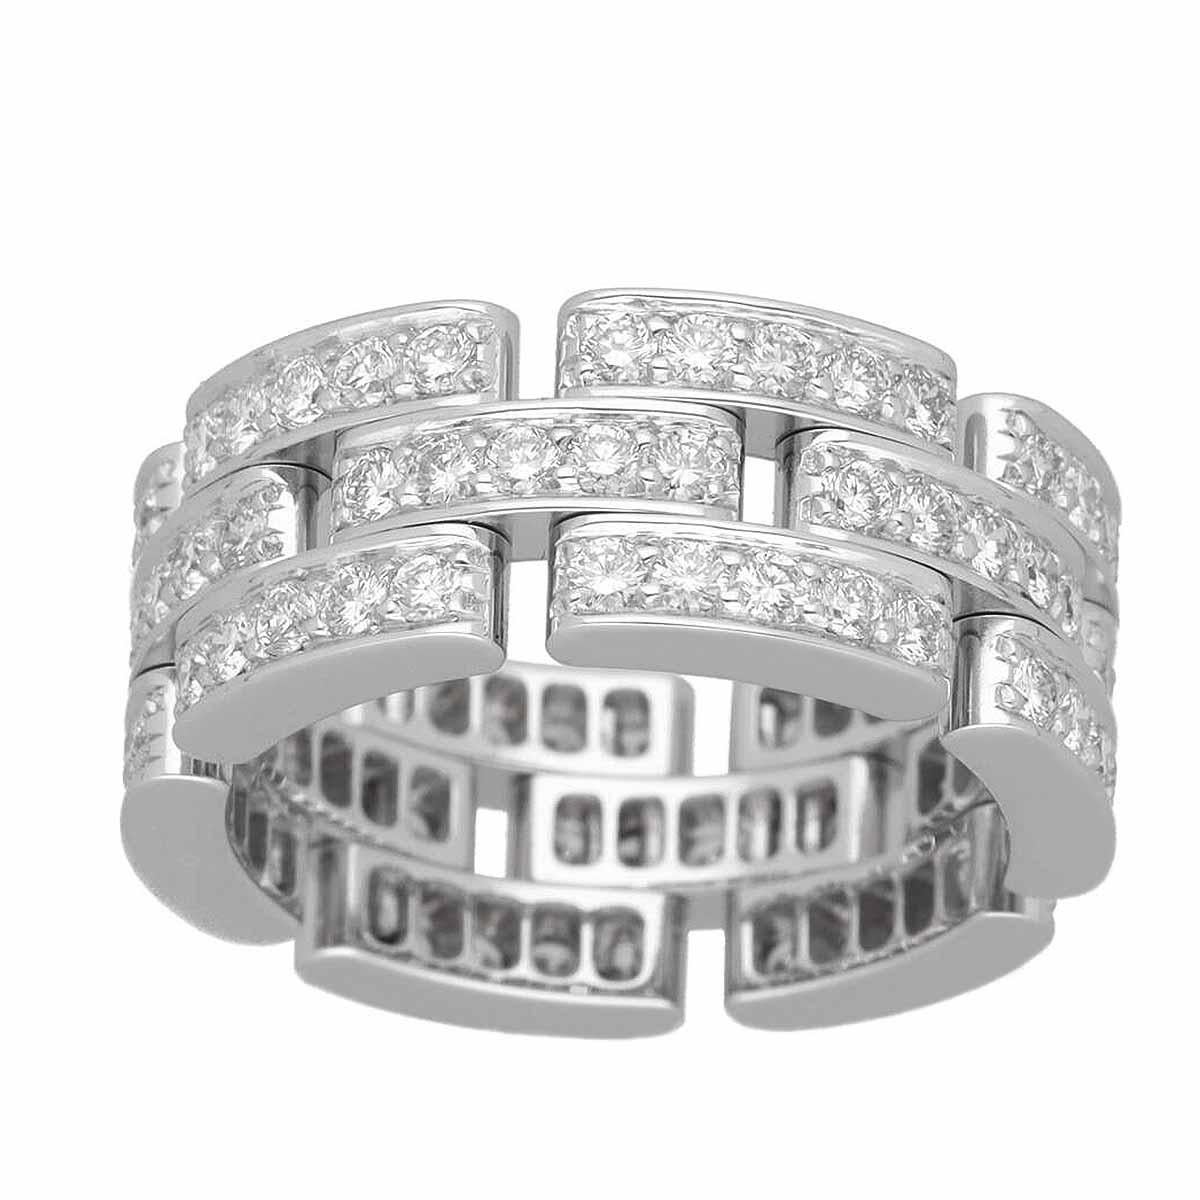 ■Item Number: 23250539
■Brand: Cartier
■Product Name: Maillon Panthere 3-Row Ring
■Material: Diamonds, 750 K18 WG White Gold
■Weight: Approximately 9.4g (approx)
■Ring Size: Approximately EU:52 / USA：6
■Width: Approximately 8.05mm
■Accessories: